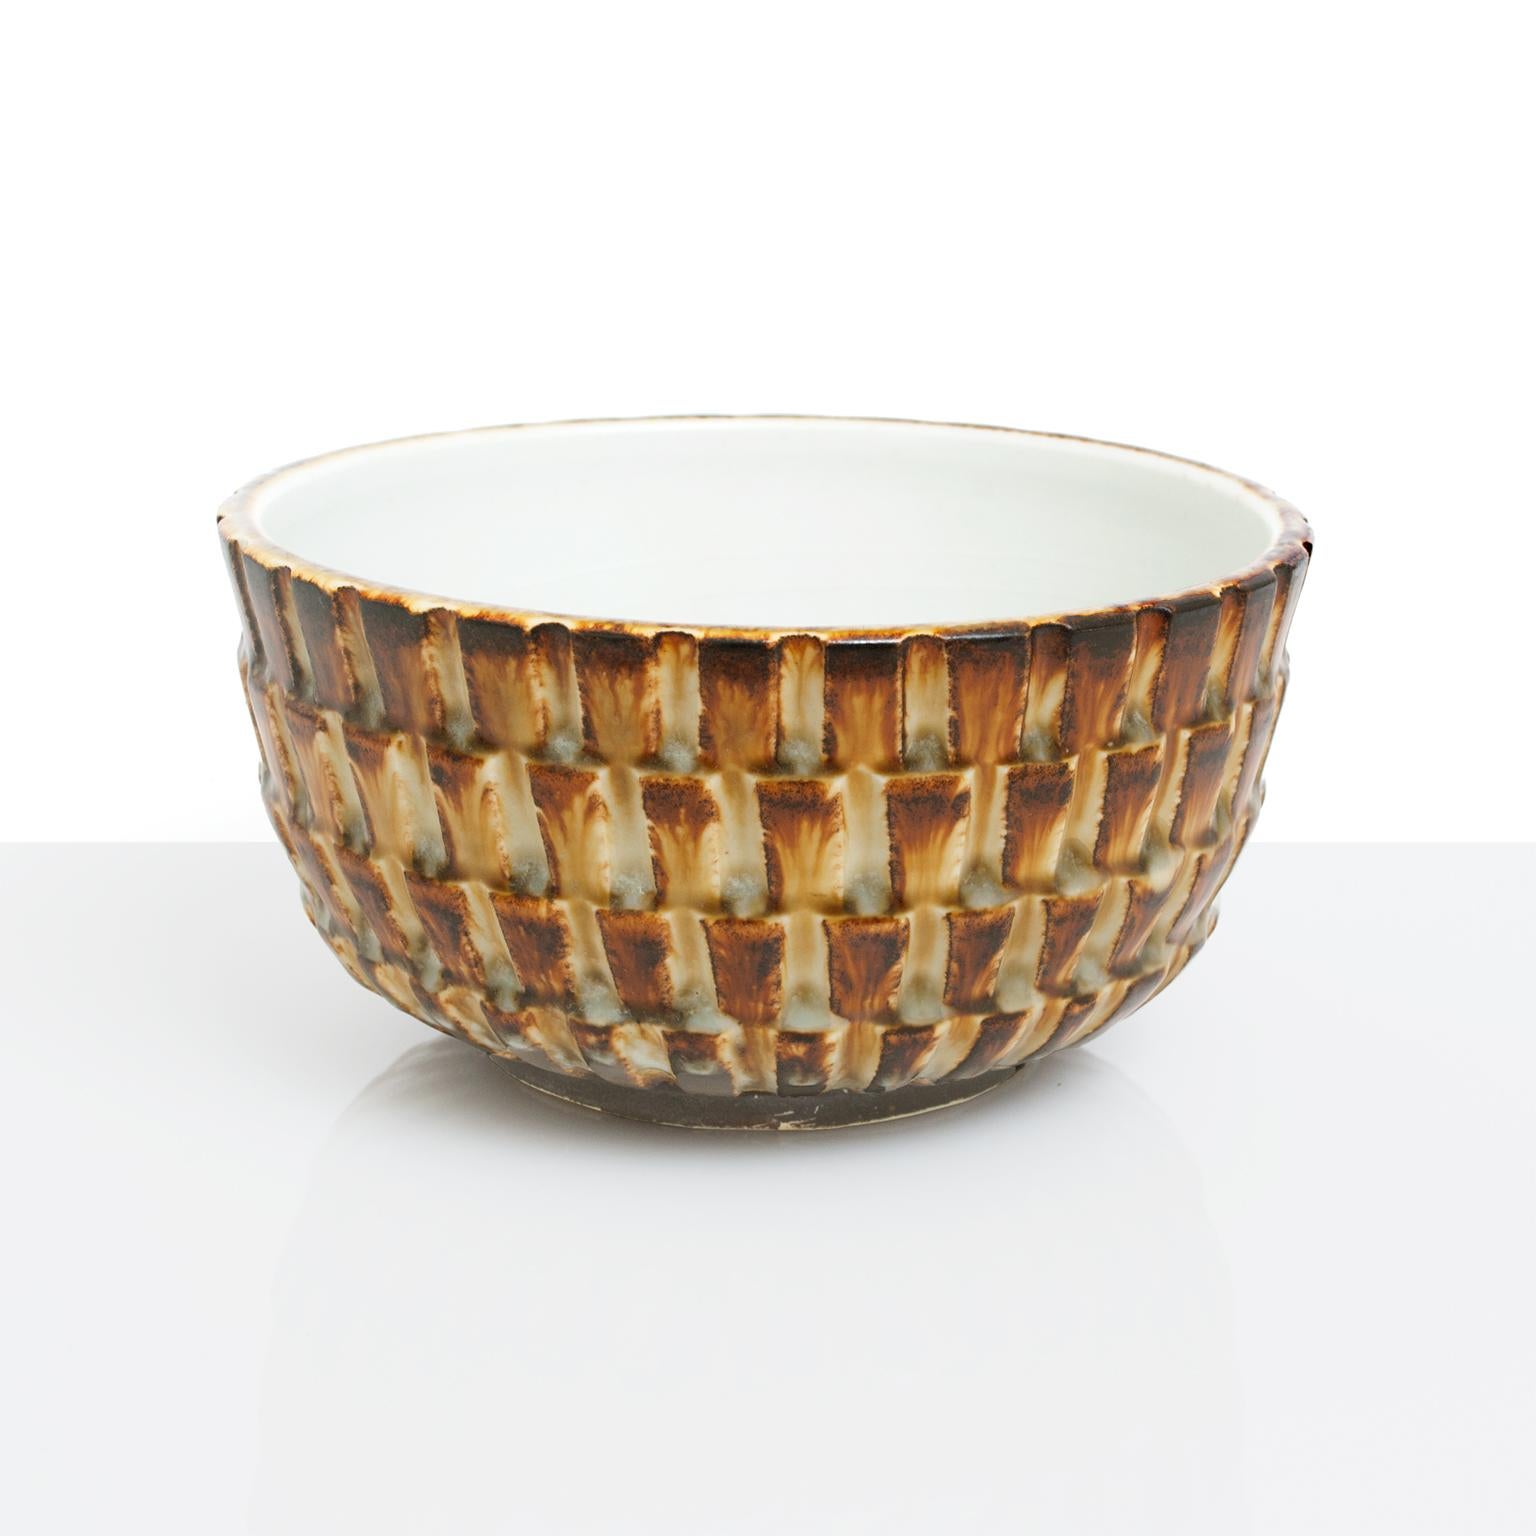 Scandinavian Modern unique ceramic bowl by Gertrud Lonegren. Lonegren studied in Vienna and Stockholm during the 1920s, she worked at Upsala-Ekeby in the 1930s before creating these studio pieces at Rörstrand between 1937-1942.
 
Measures: Height